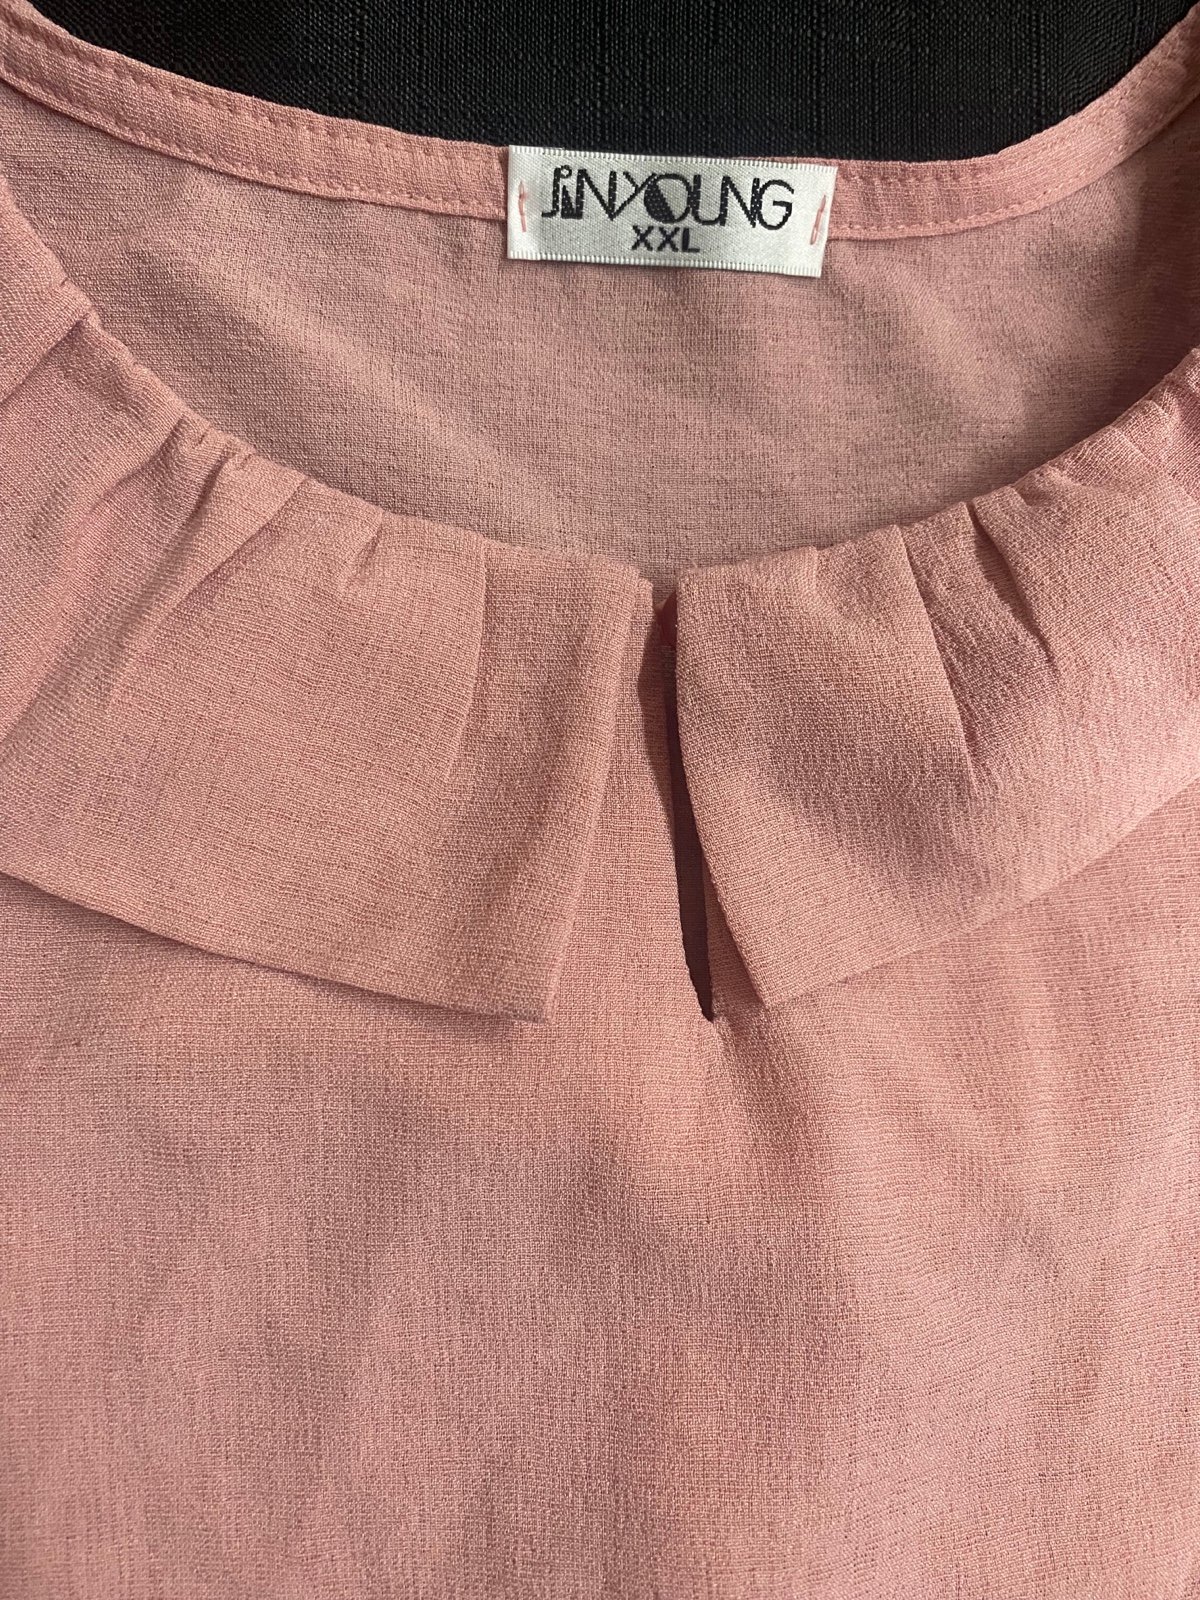 Exclusive JNYOUNG Pink Women Blouse hQHde4FgG Online Exclusive